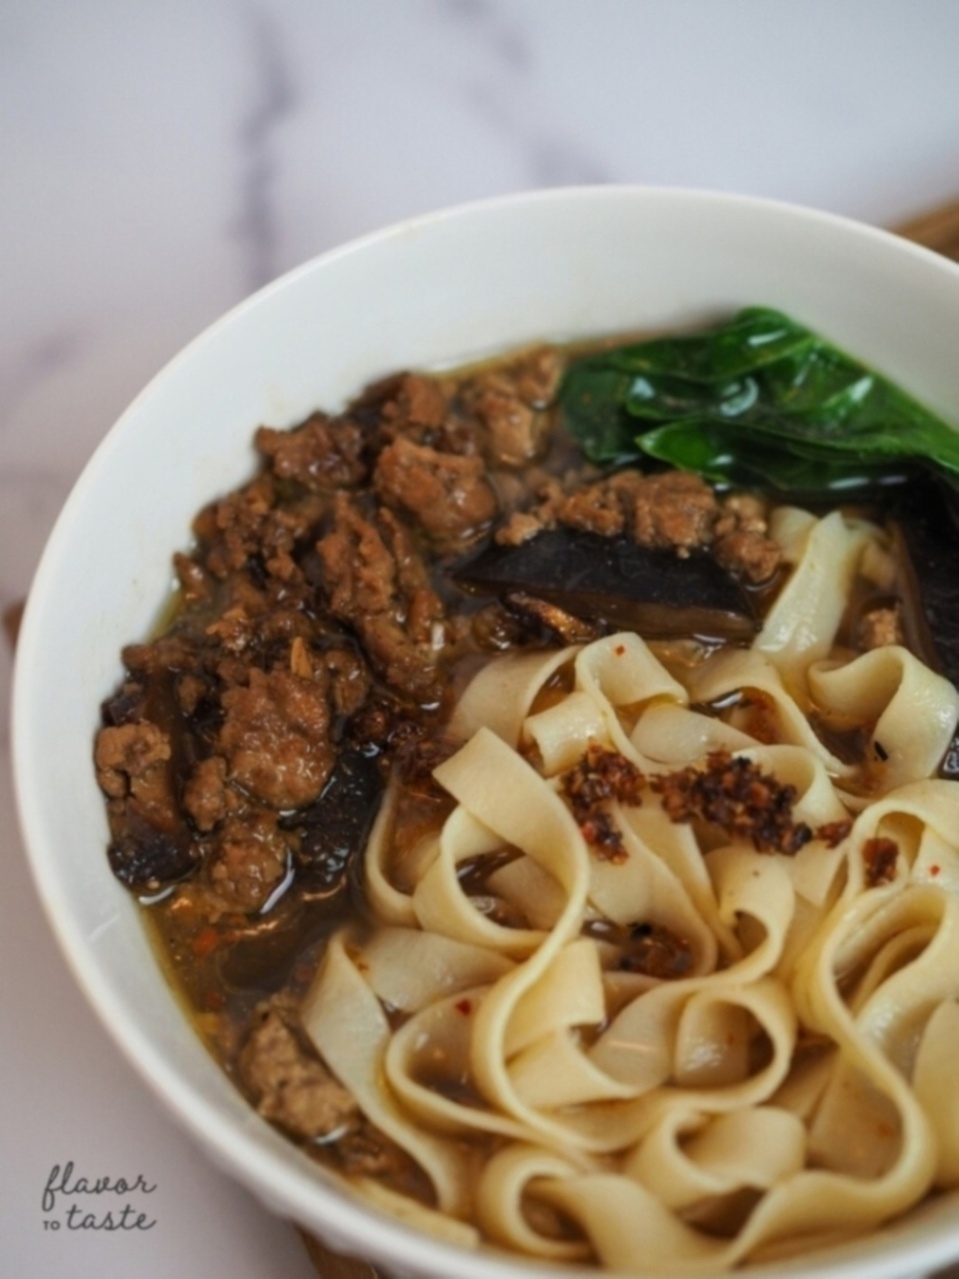 Hot bowl of Hakka board noddles with minced pork and greens